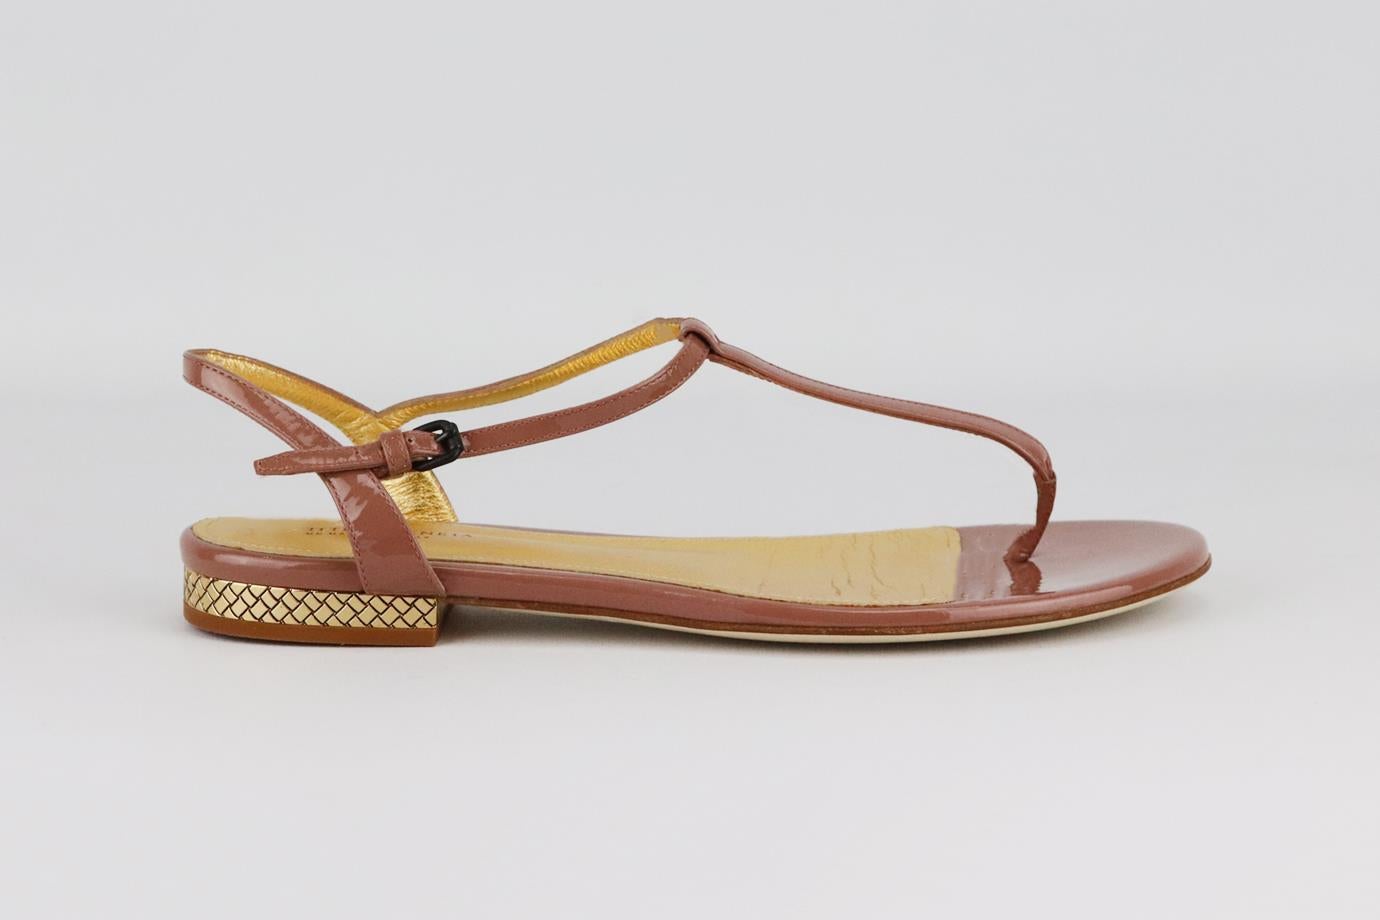 Bottega Veneta patent leather sandals. Pink. Buckle fastening at side. Does not come with box or dustbag. Size: EU 38 (UK 5, US 8). Insole: 9.5 in. Heel: 0.5 in
